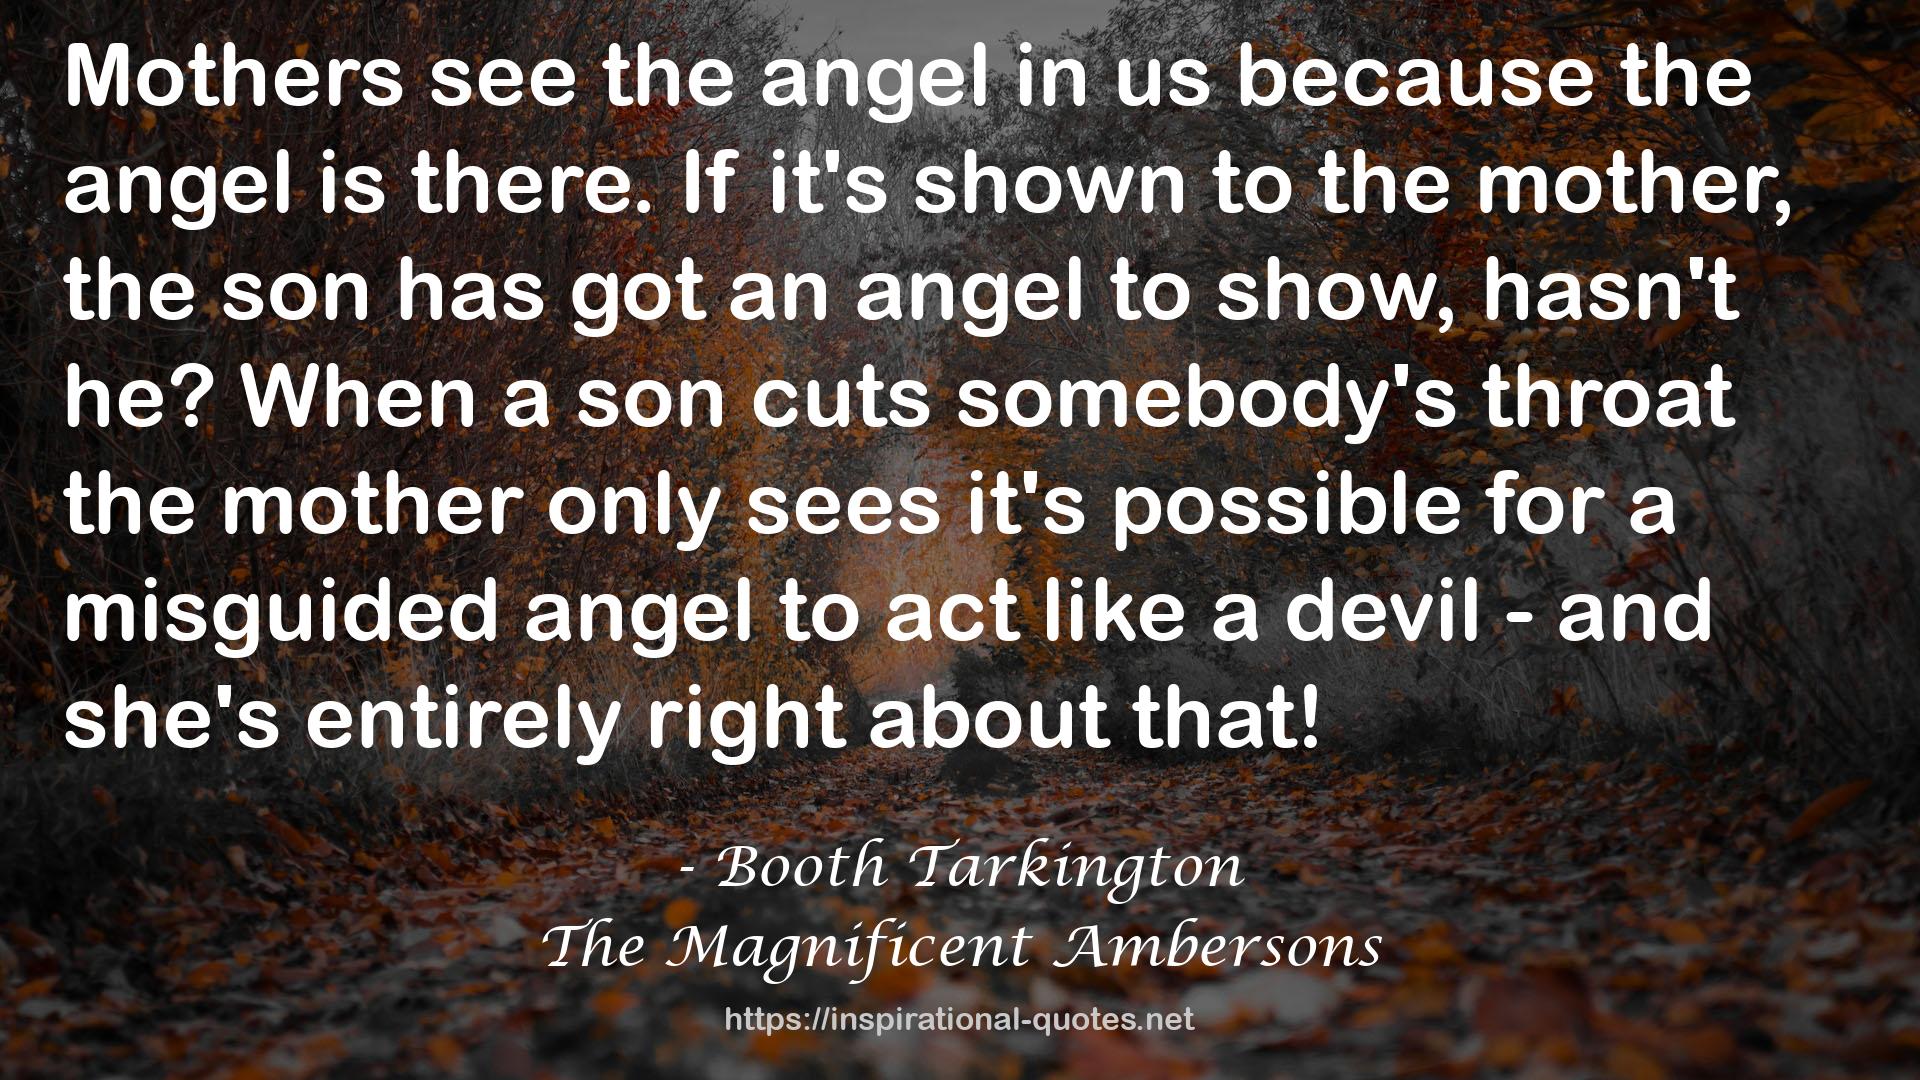 a misguided angel  QUOTES